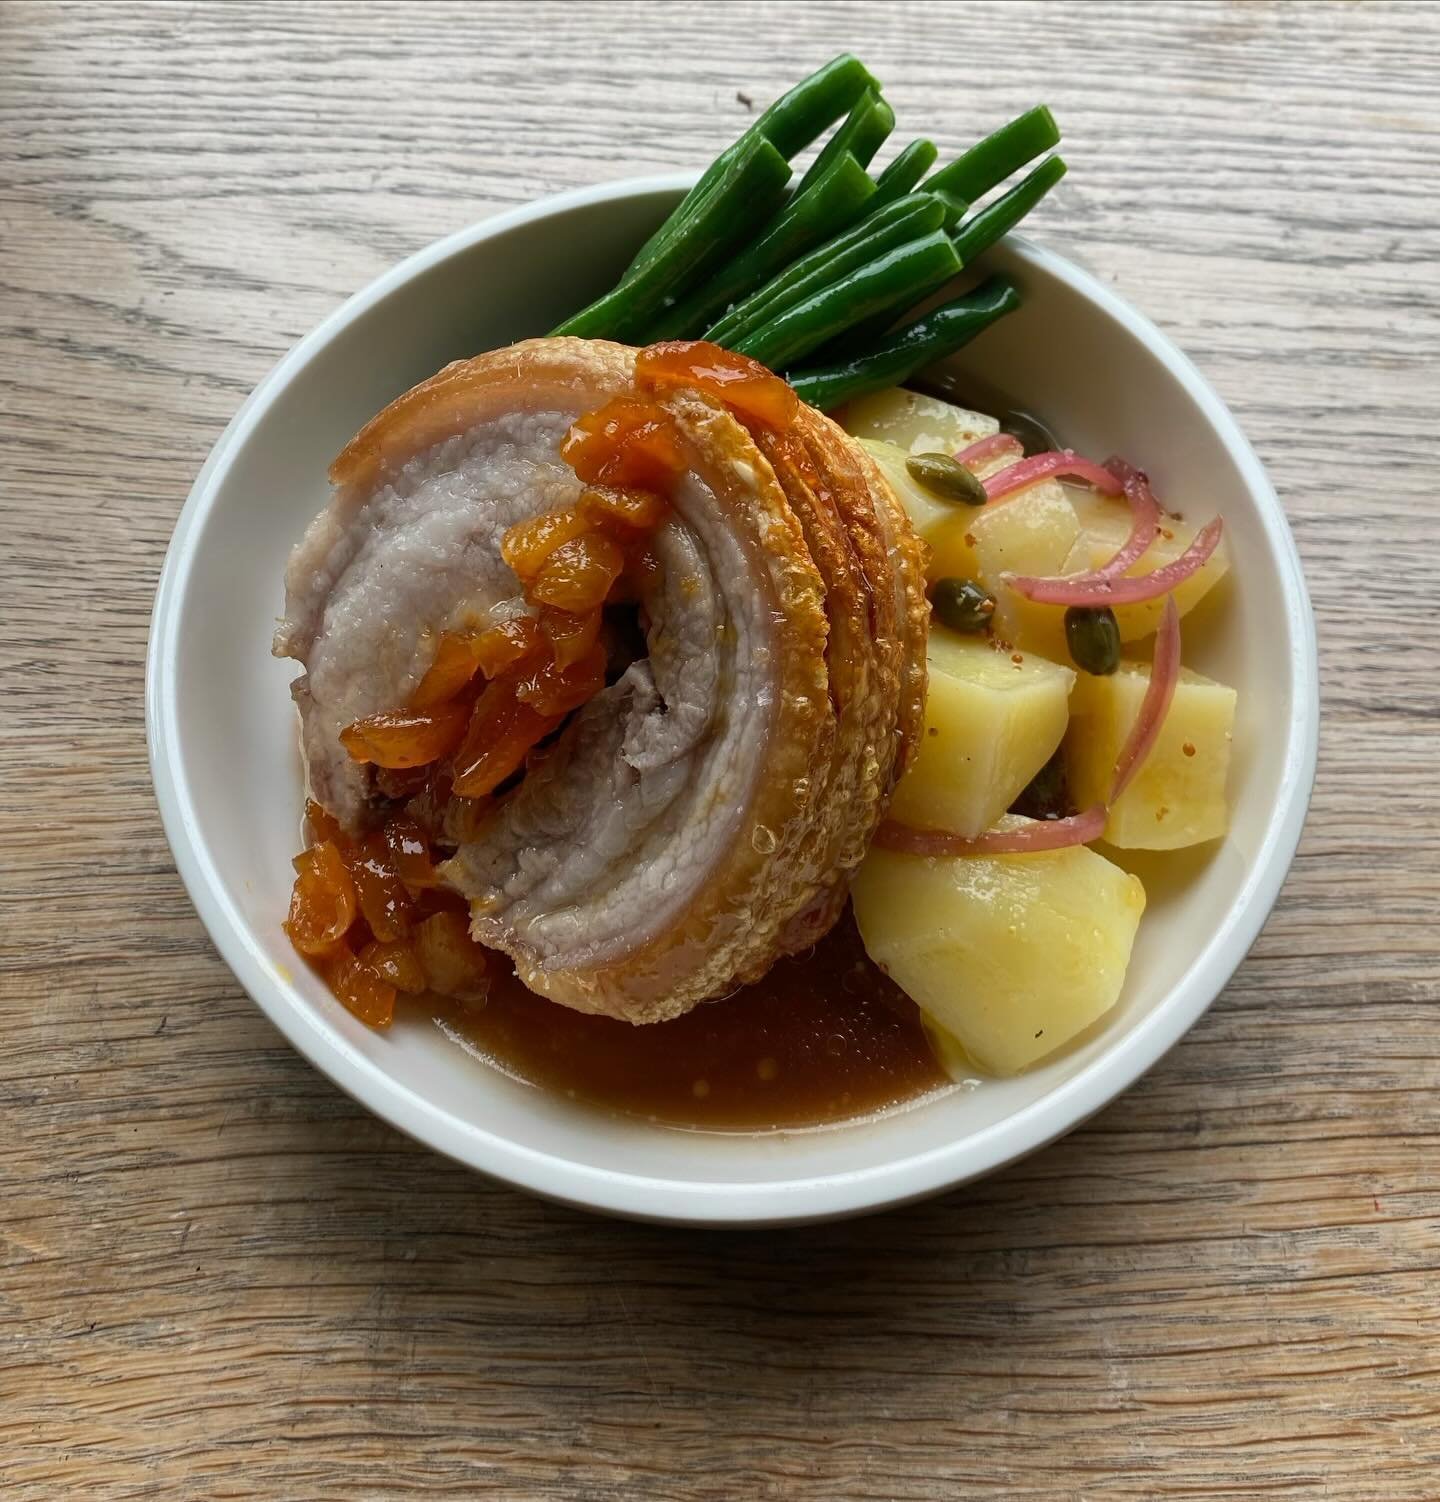 We&rsquo;re open for lunch today ✨

Full menu + $30 Ritual Roast from 12-3pm
Snack &amp; drinks through till 5pm

Today&rsquo;s $30 Ritual Roast is a cracker too! Roast pork belly, potato, green beans, apricot gastrique 🤤 

Space for a walk-ins or b